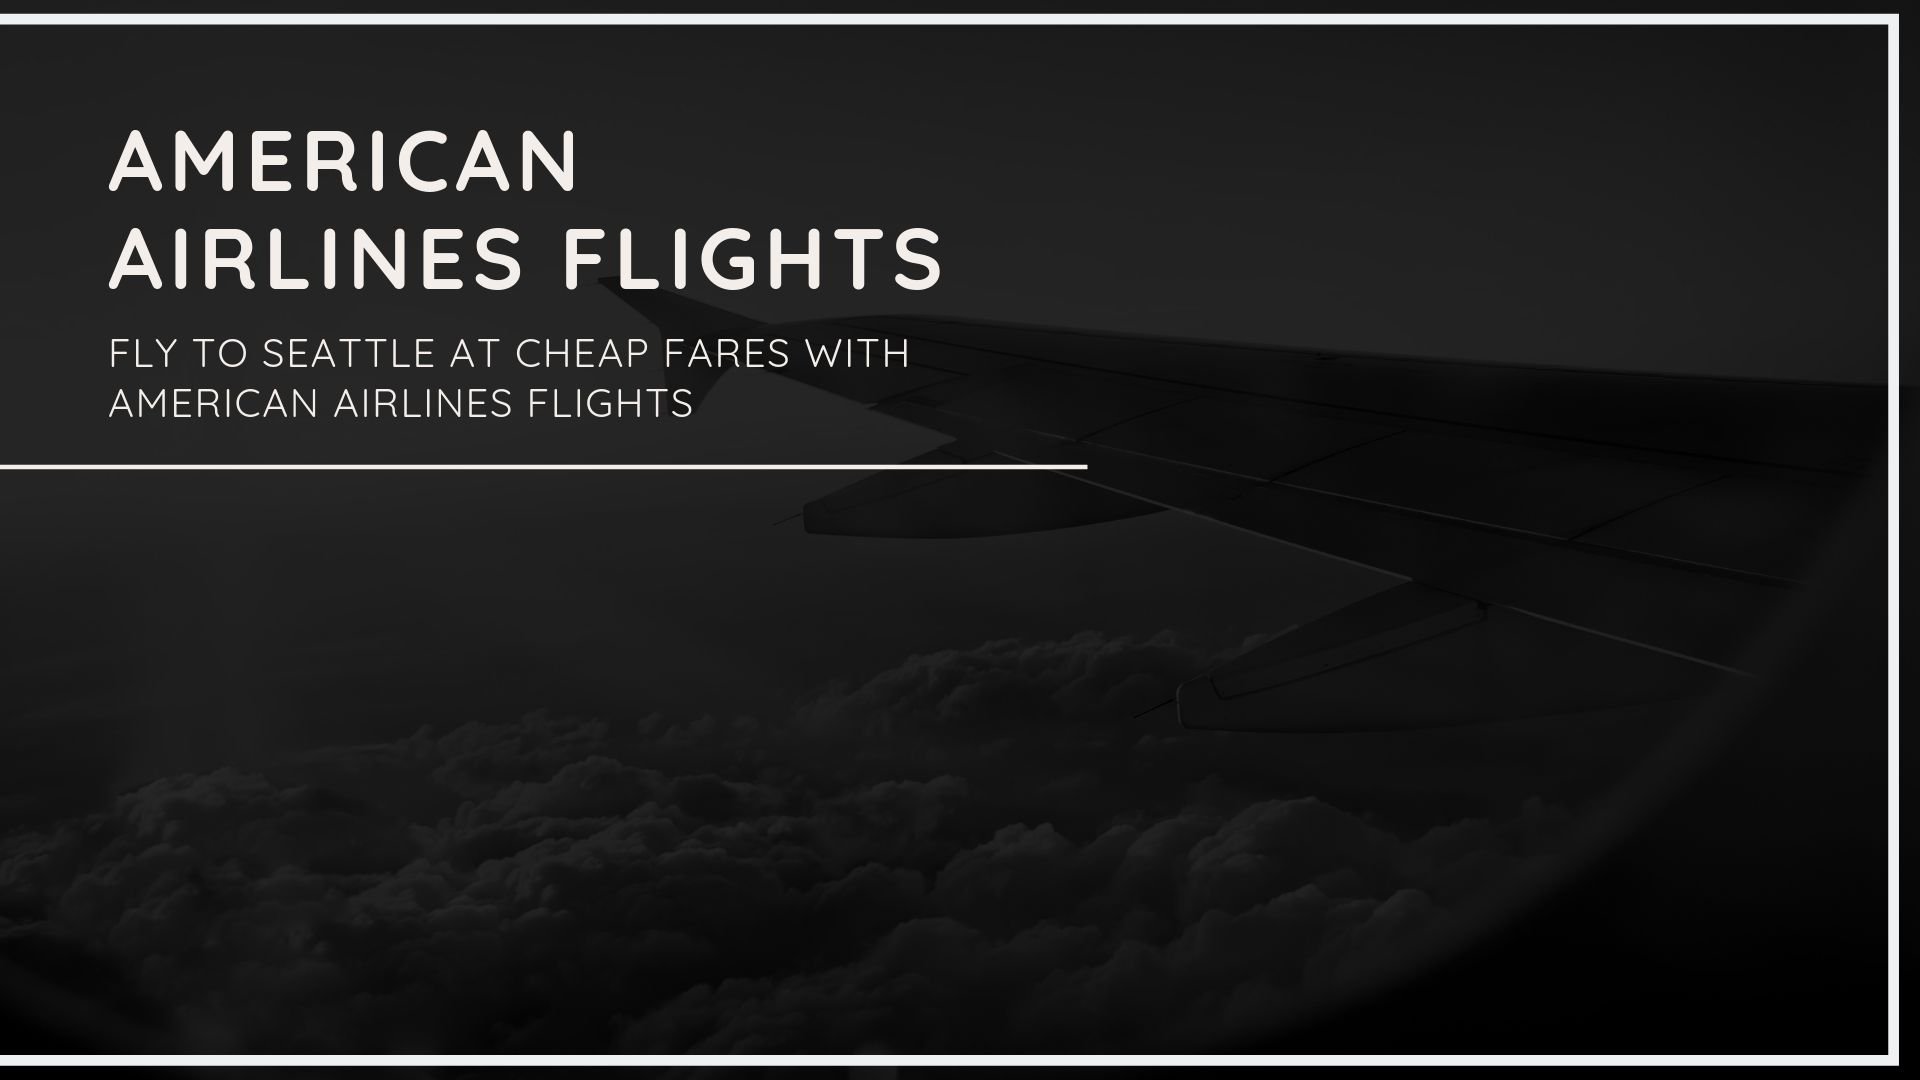 Fly To Seattle at Cheap Fares with American Airlines Flights